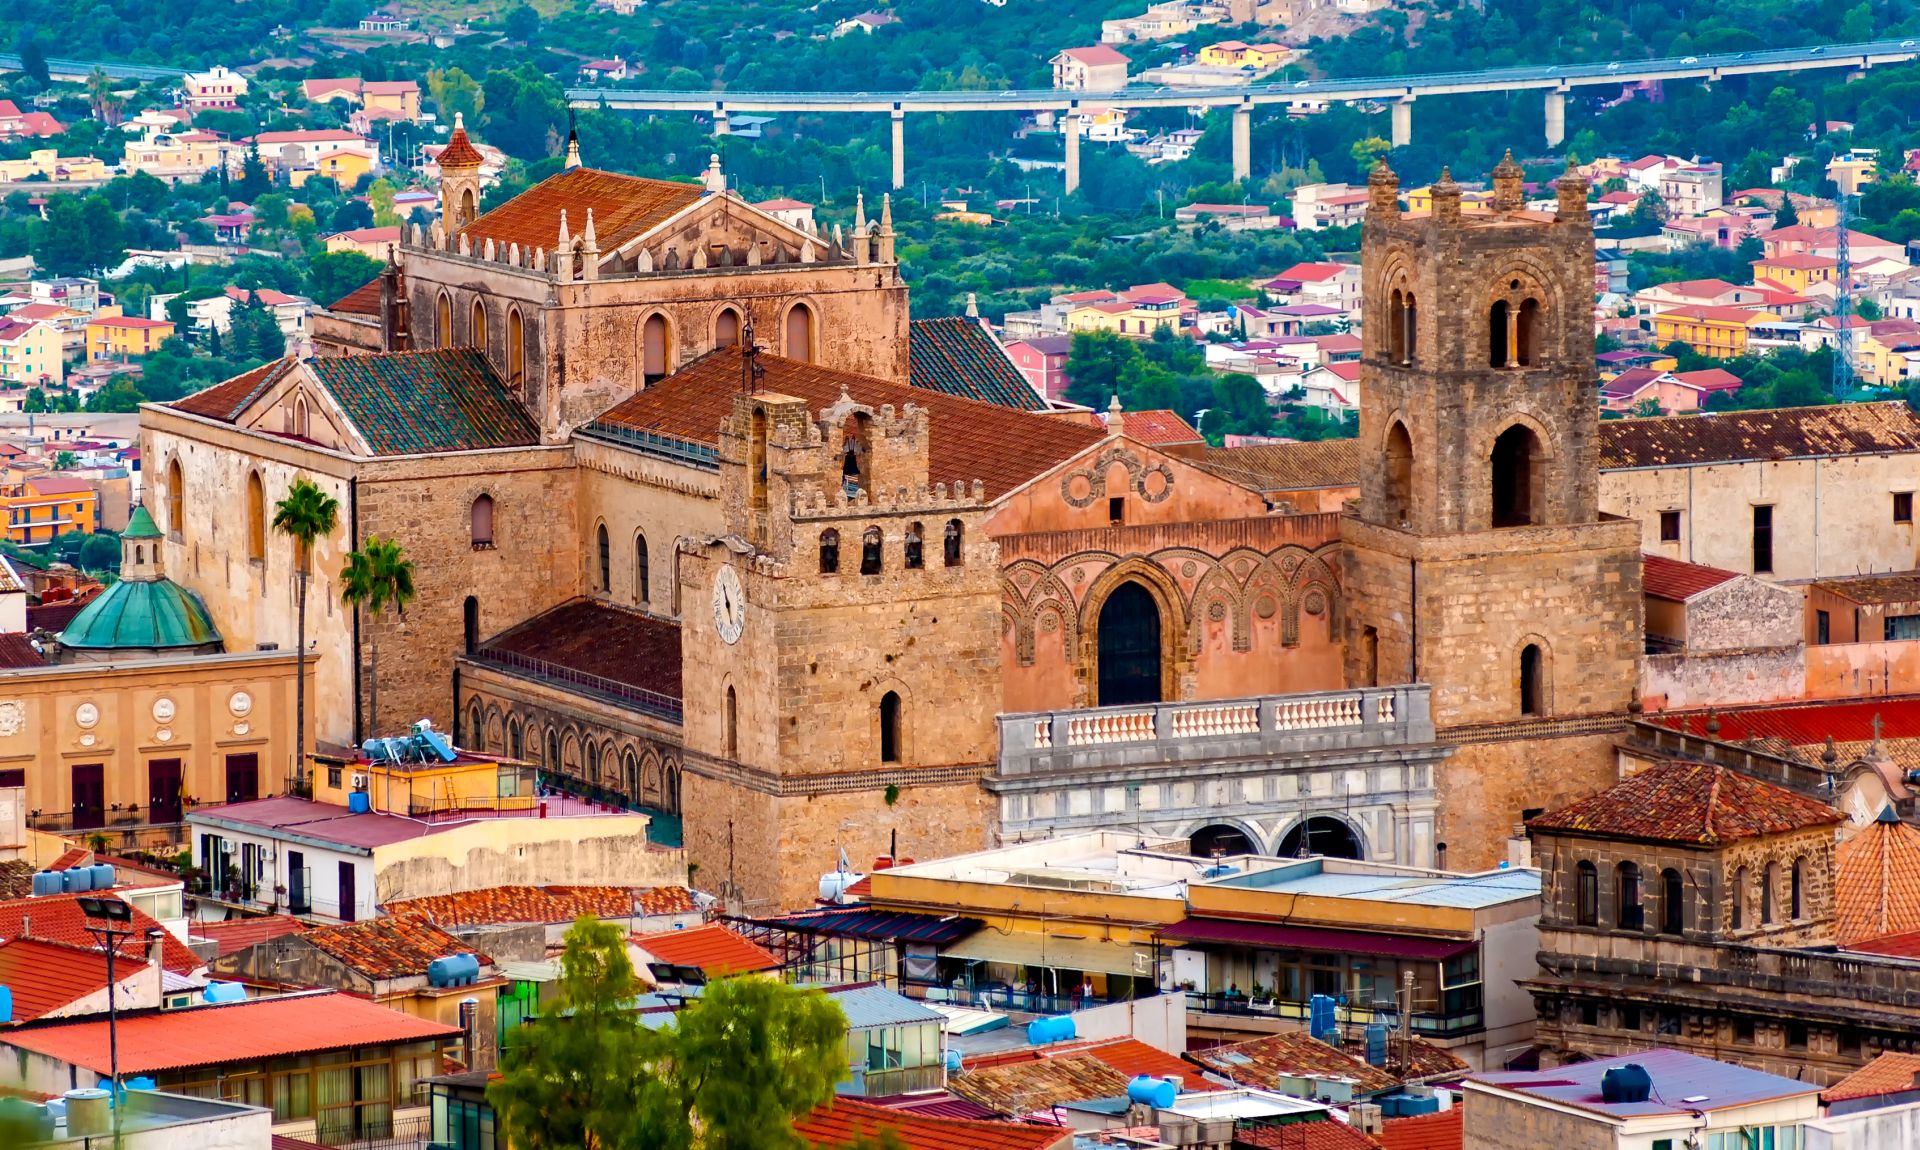 The-Monreale-Cathedral-seen-from-the-mountains-that-surround-the-town.-Palermo.-Italy